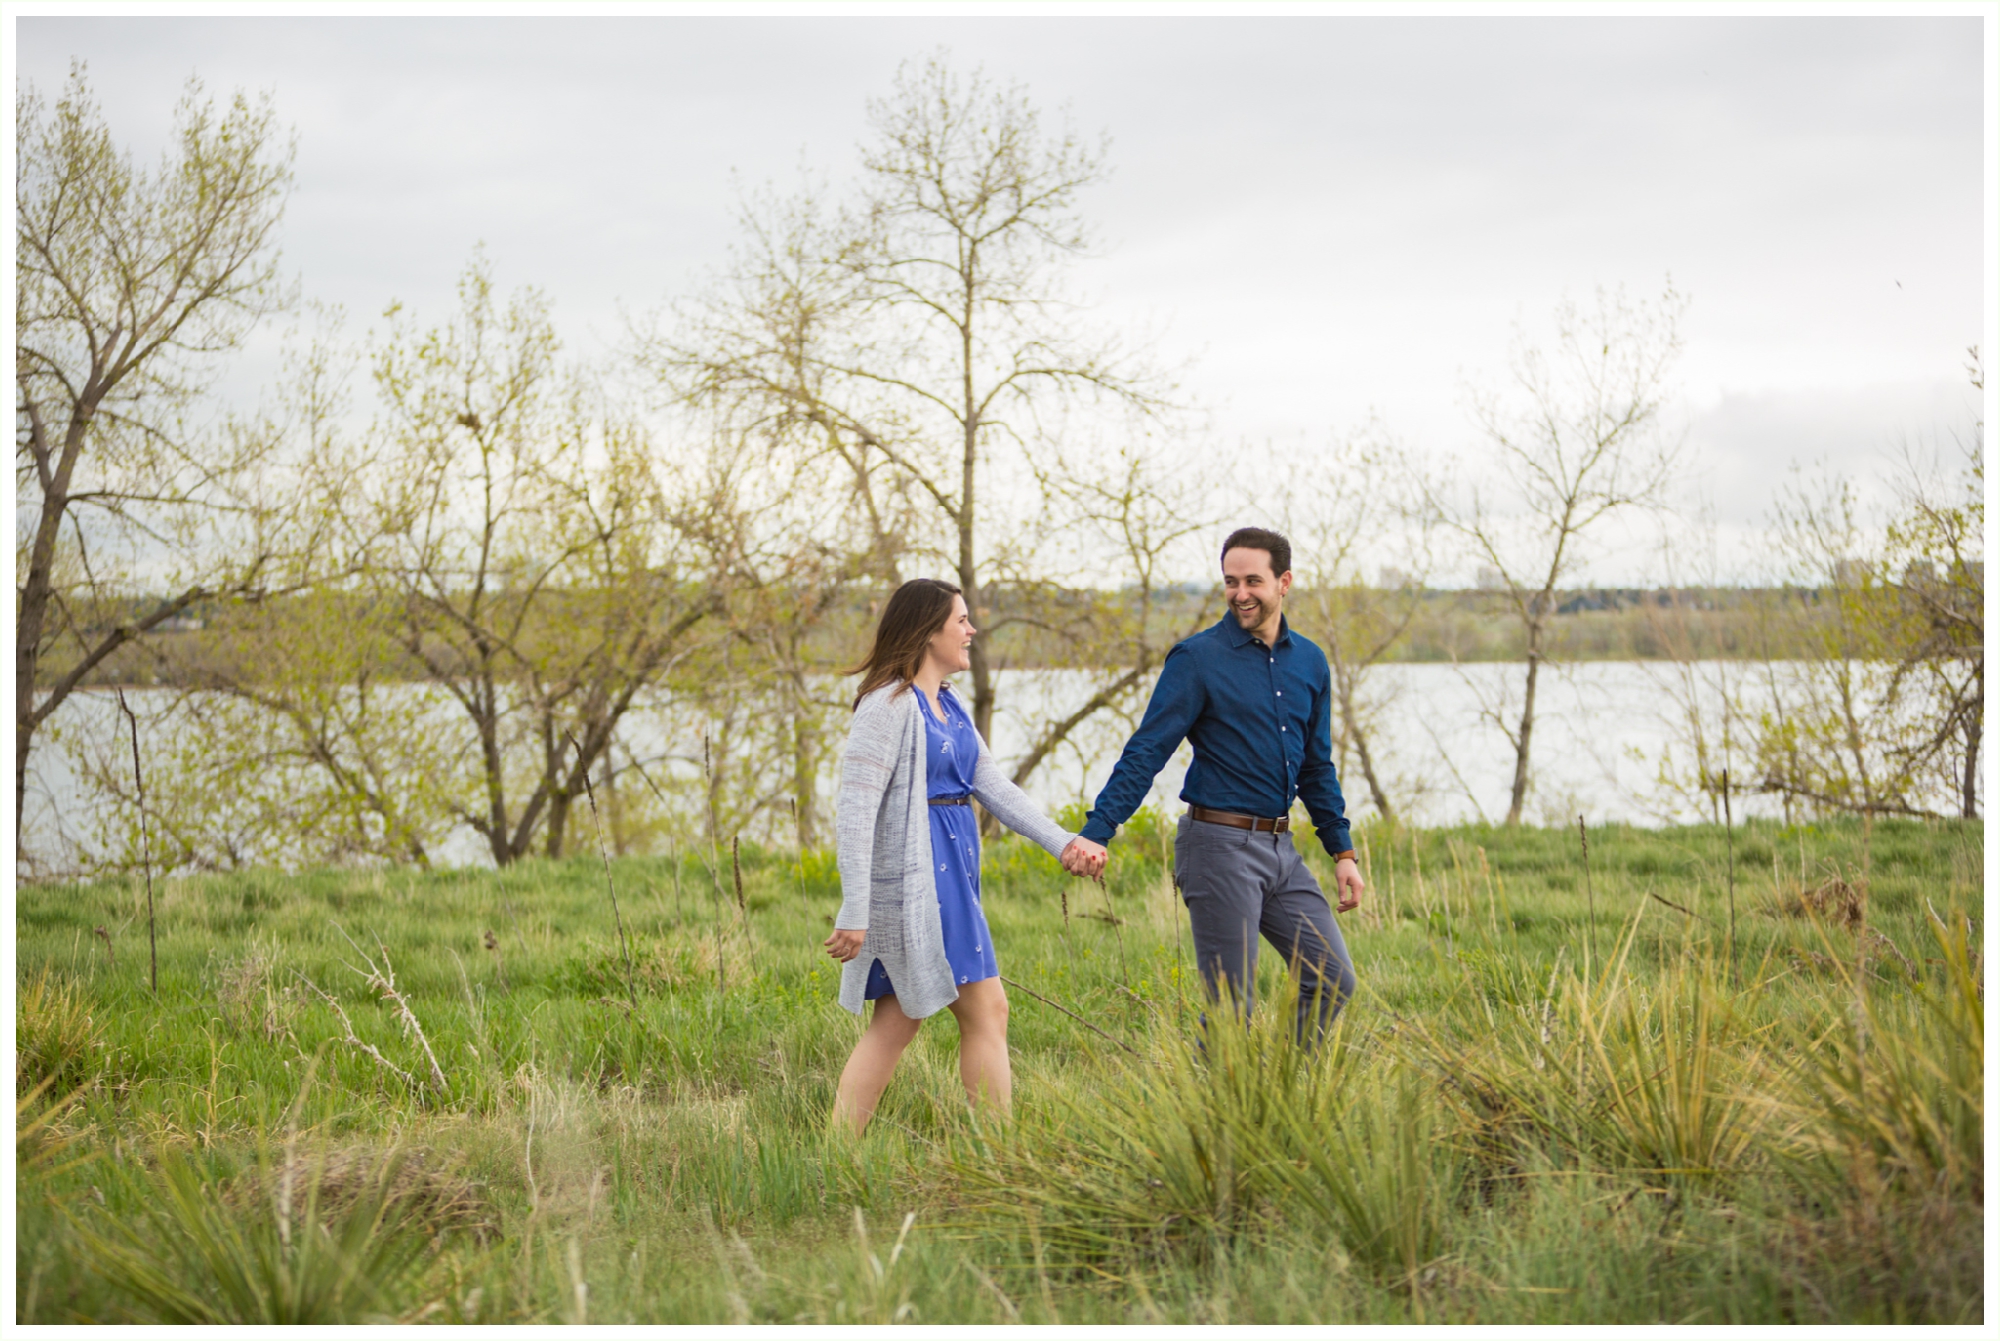 denver engagement photographer shoots spring Colorado session at Cherry Creek Reservoir. Foggy springy engagement session by Colorado engagement photographer Kathryn Kim. couple wears blue and grey engagement outfits and walks along the reservoir, laughing candidly. 